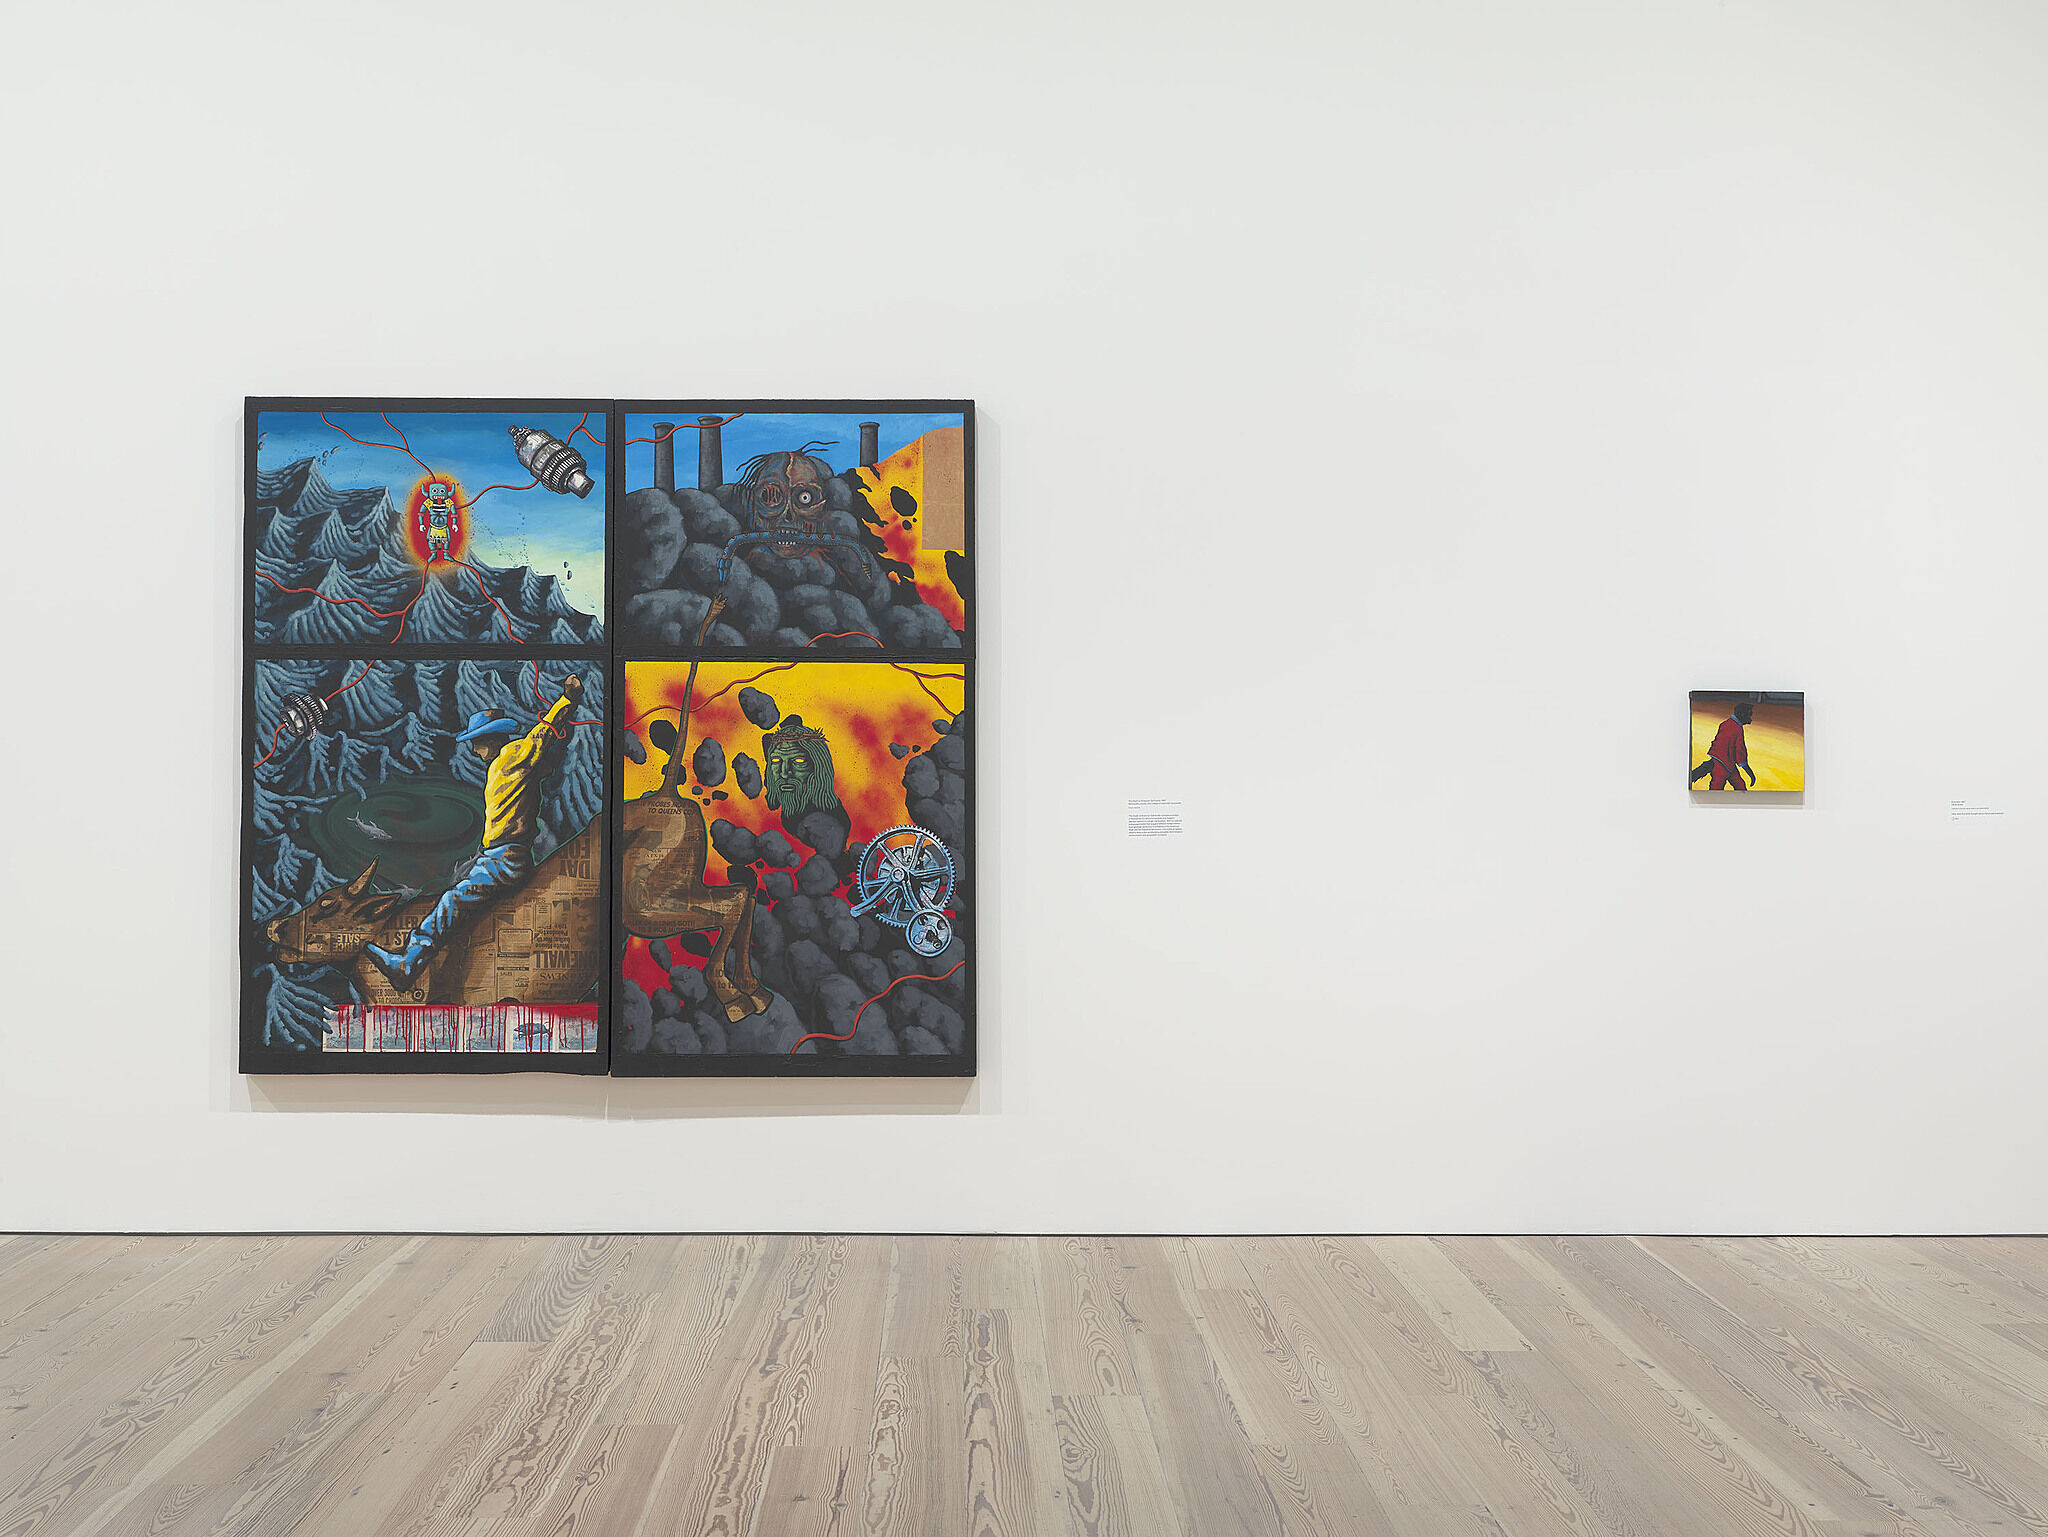 An image of the Whitney galleries with a painting on the wall